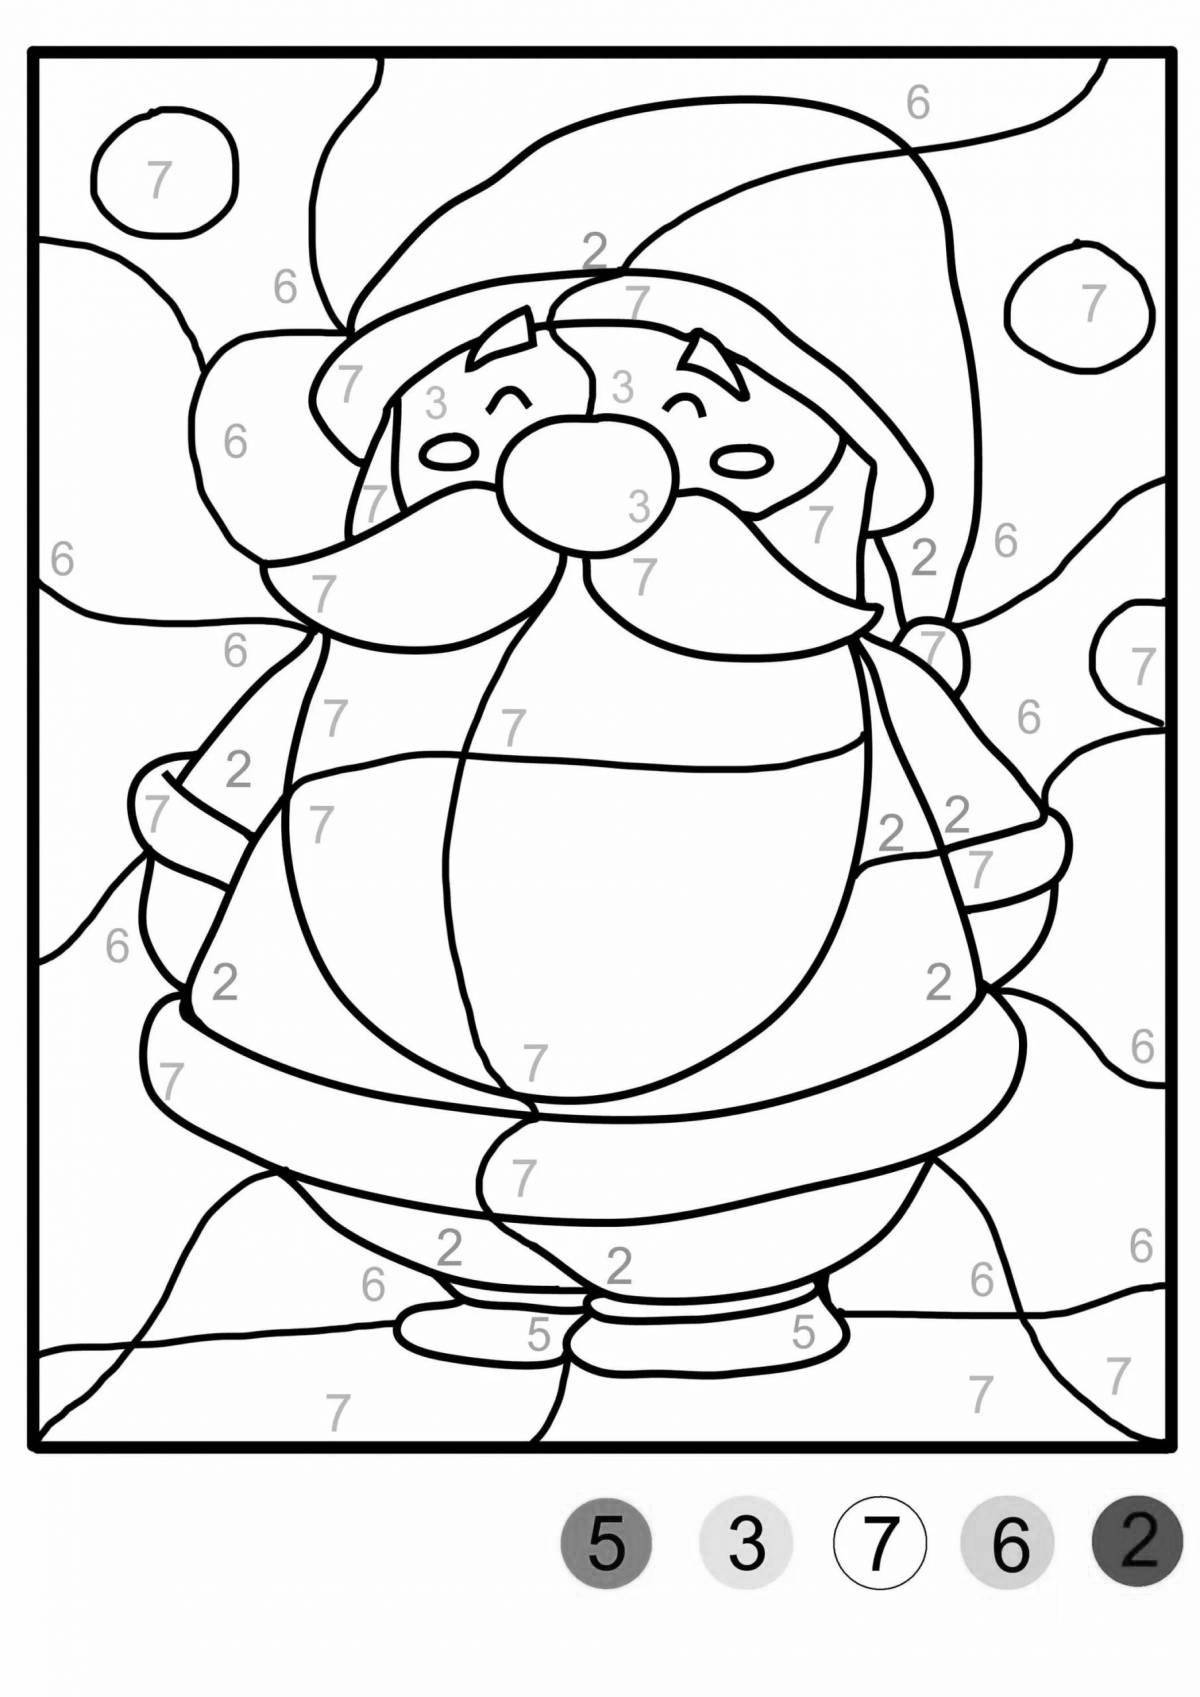 Christmas playful coloring by numbers